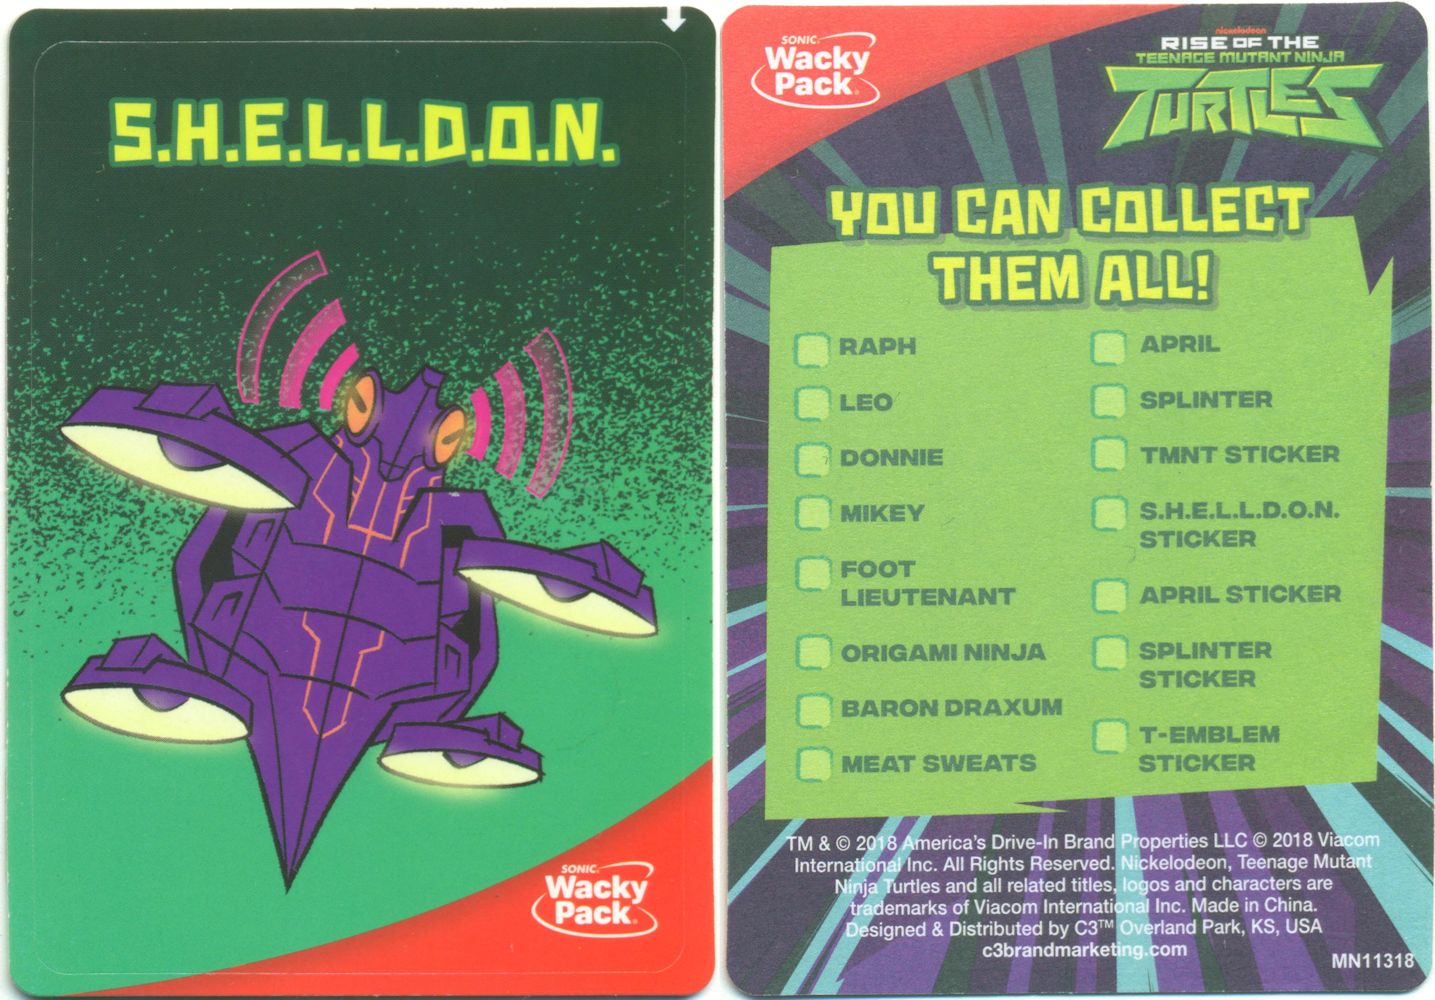 S.H.E.L.L.D.O.N. Sticker front and back